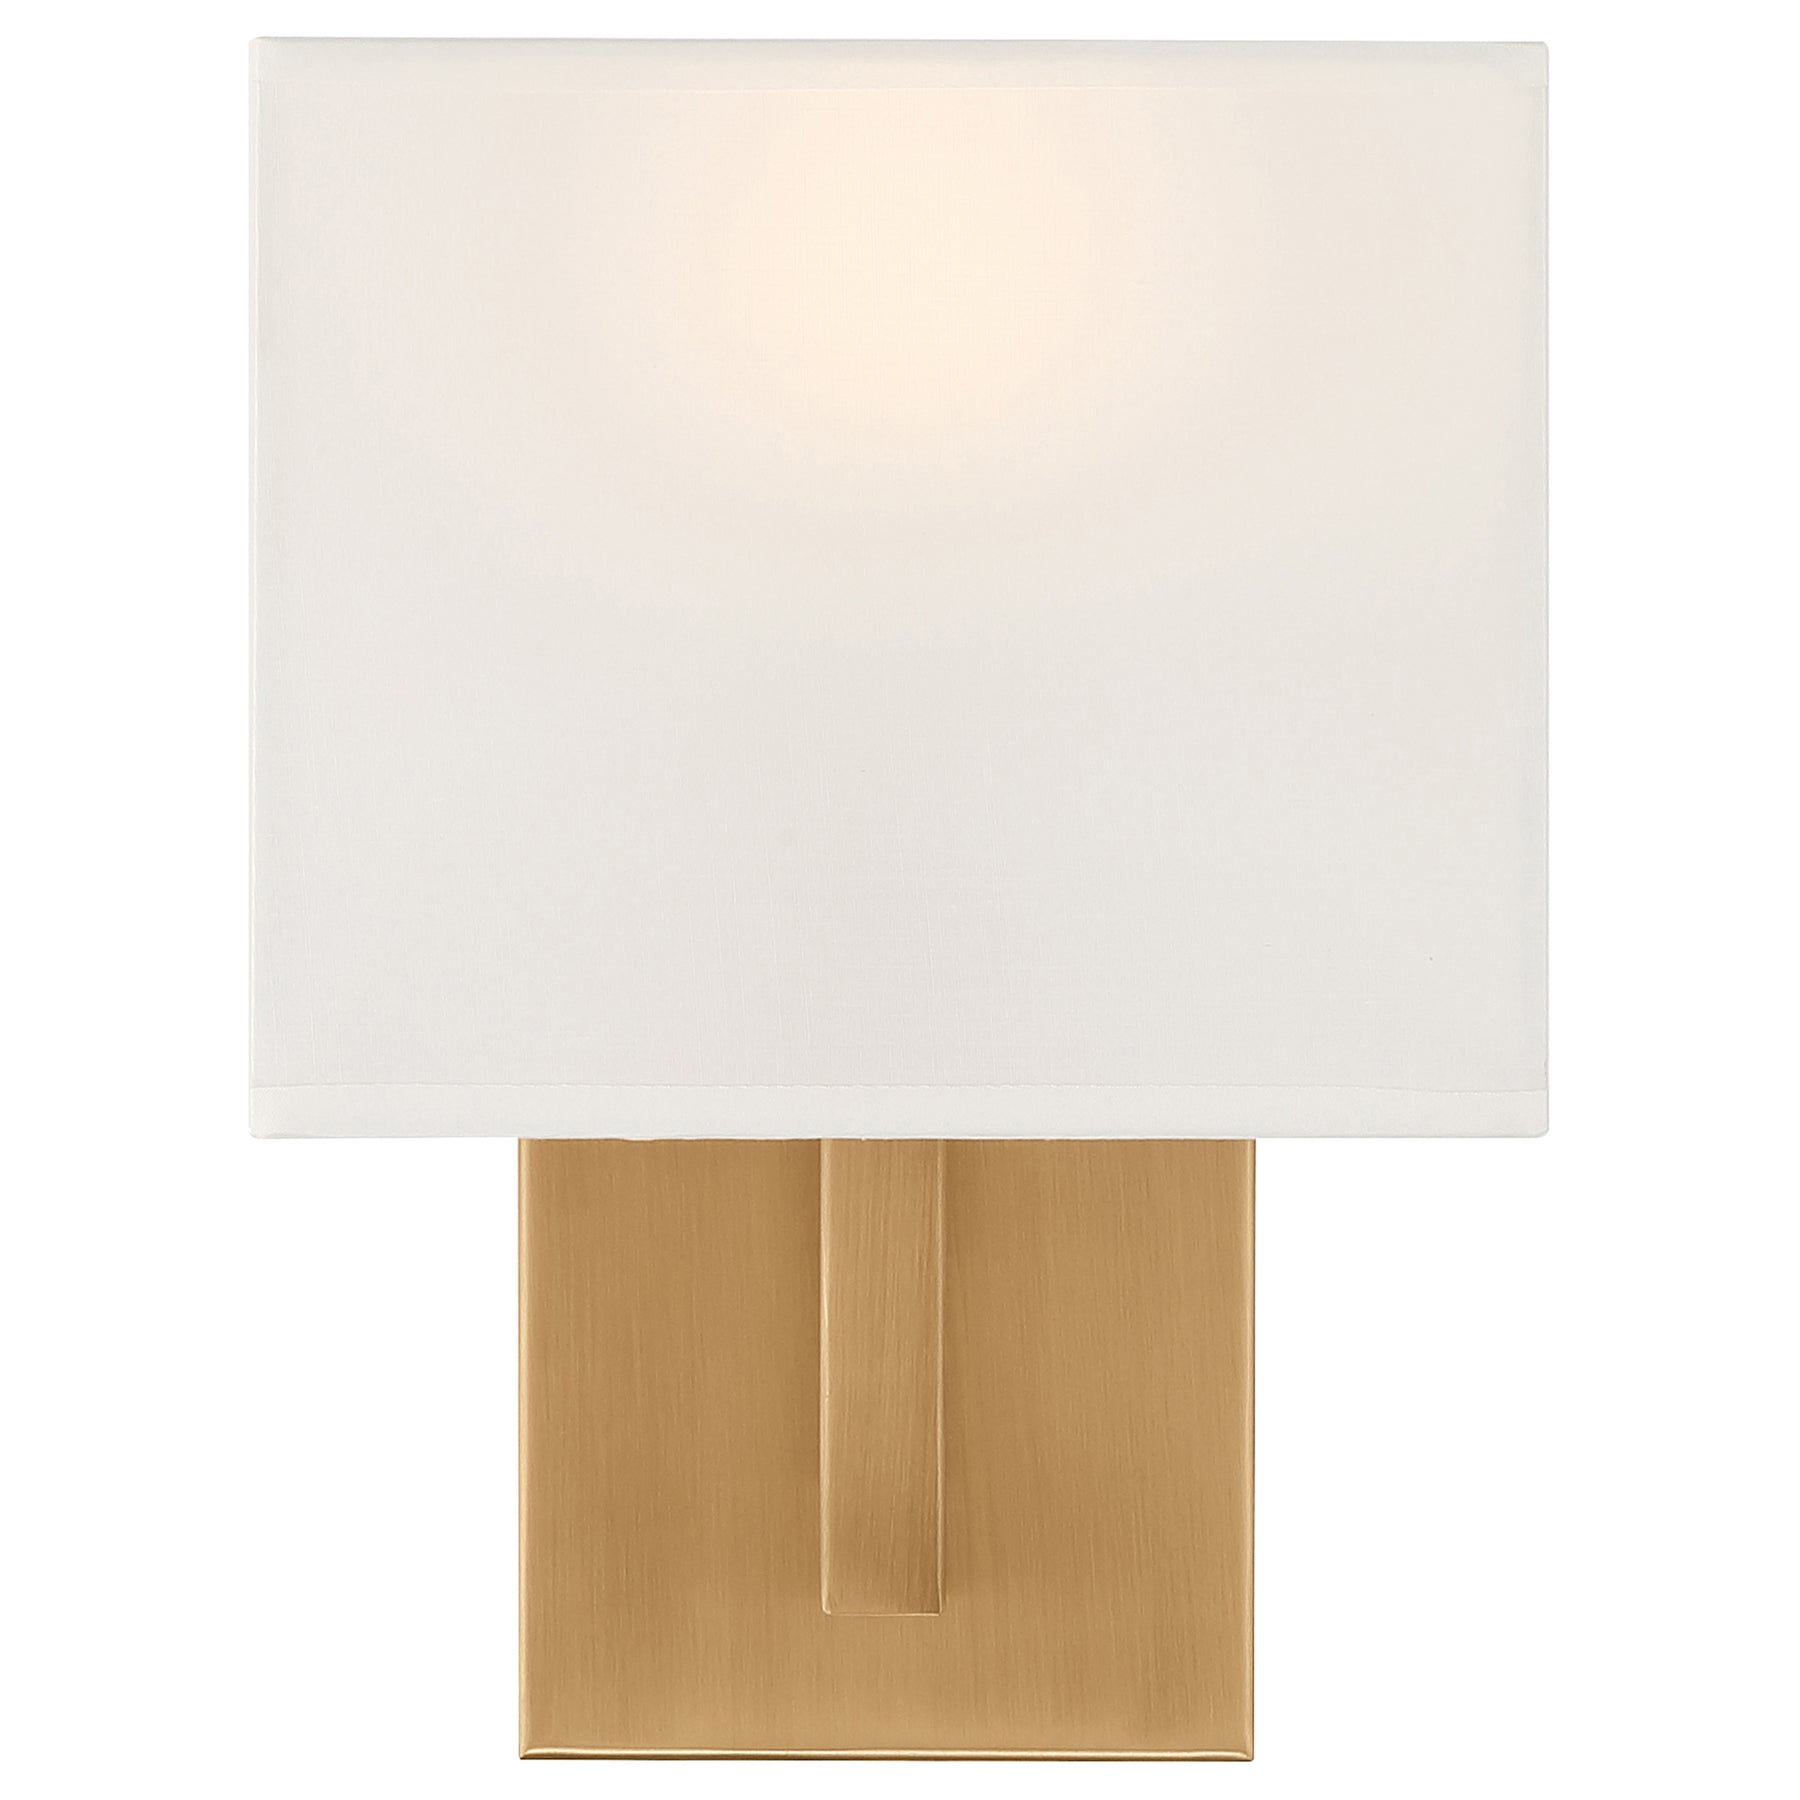 Mid Town 10.75in. LED Wall Sconce Lighting (Antique Brushed Brass)